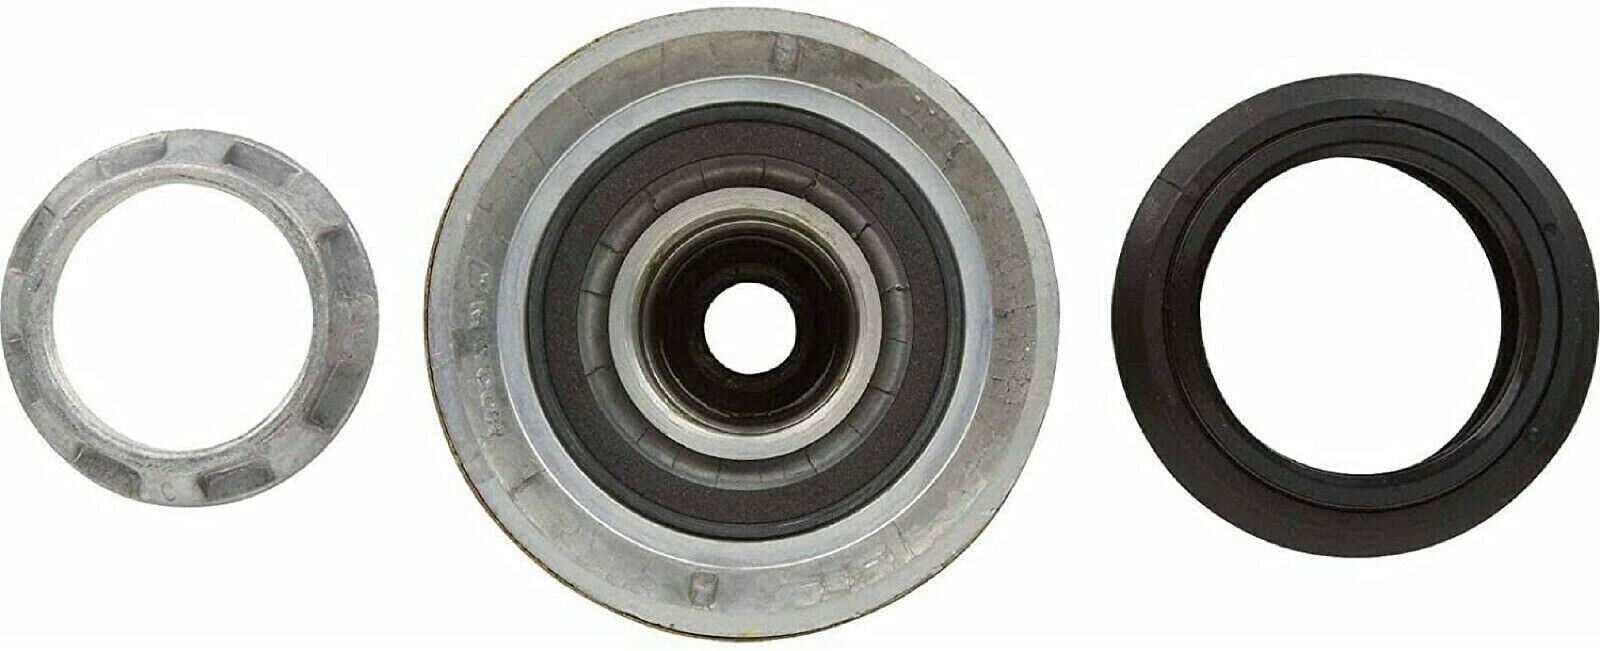 New Genuine OEM Whirlpool Washer Stem and Seal Kit 6-2095720